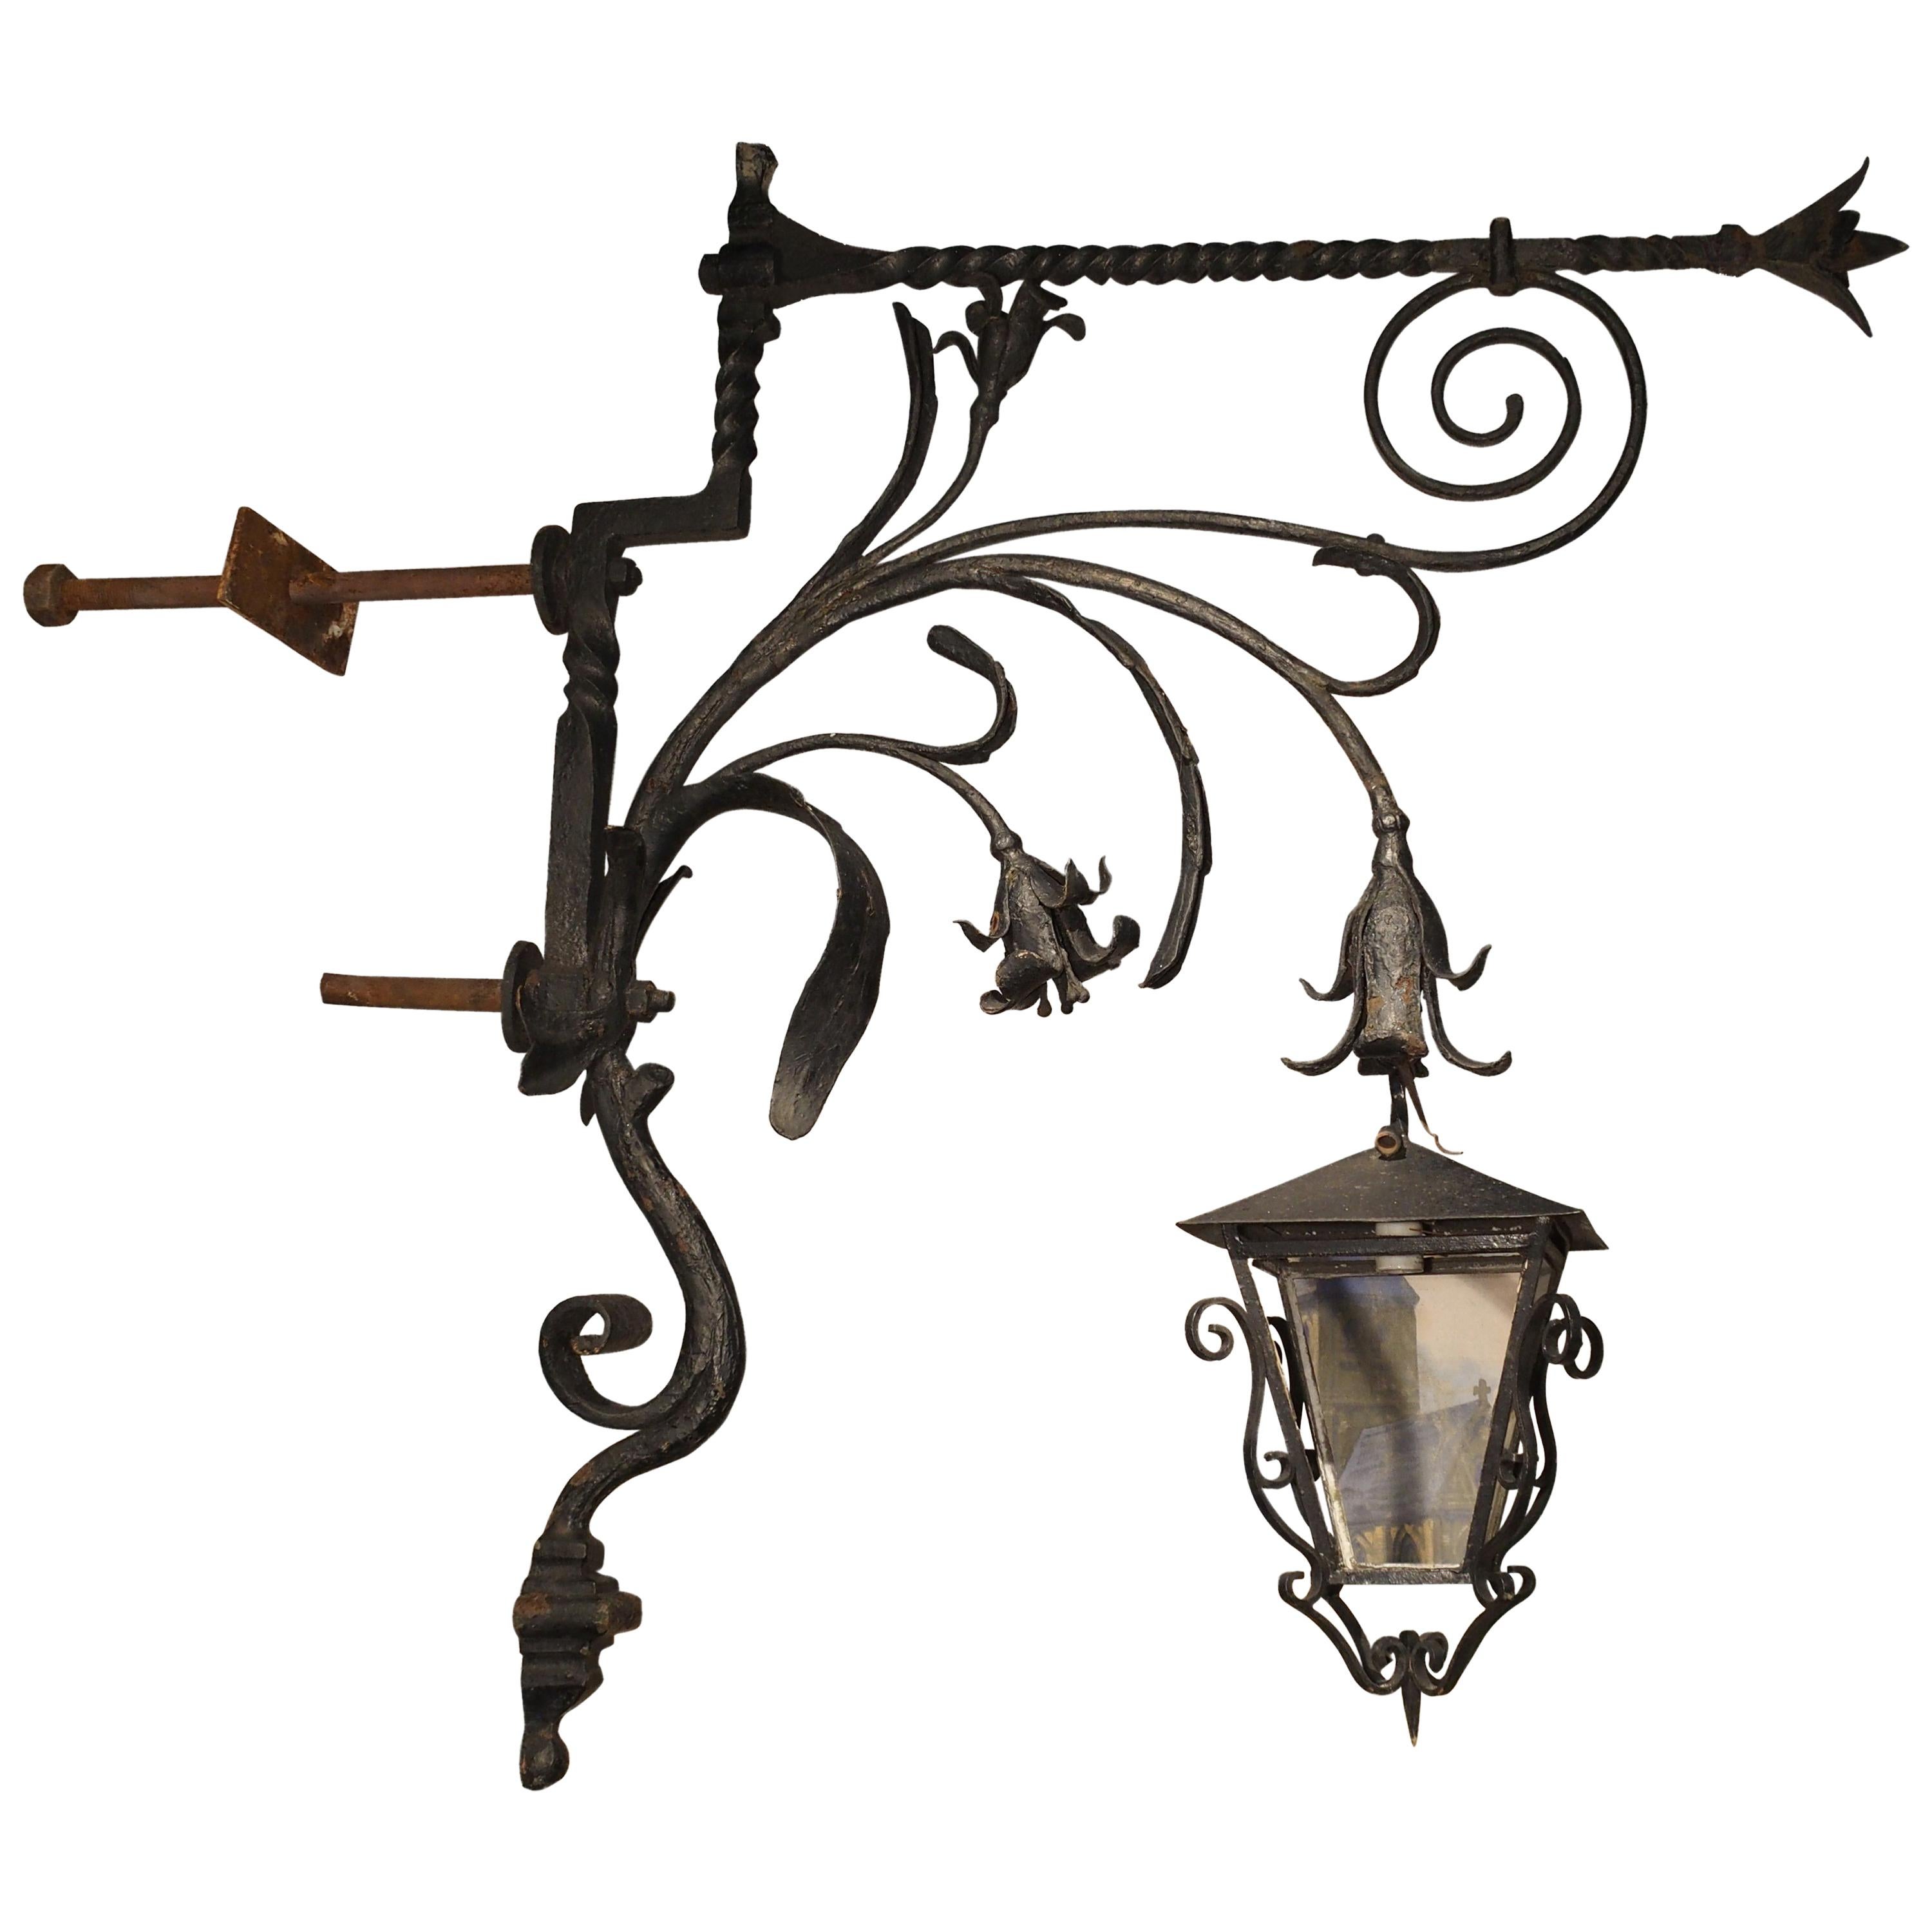 Massive circa 1700 Forged Iron Lantern Holder from a Castle in Wallonia Belgium